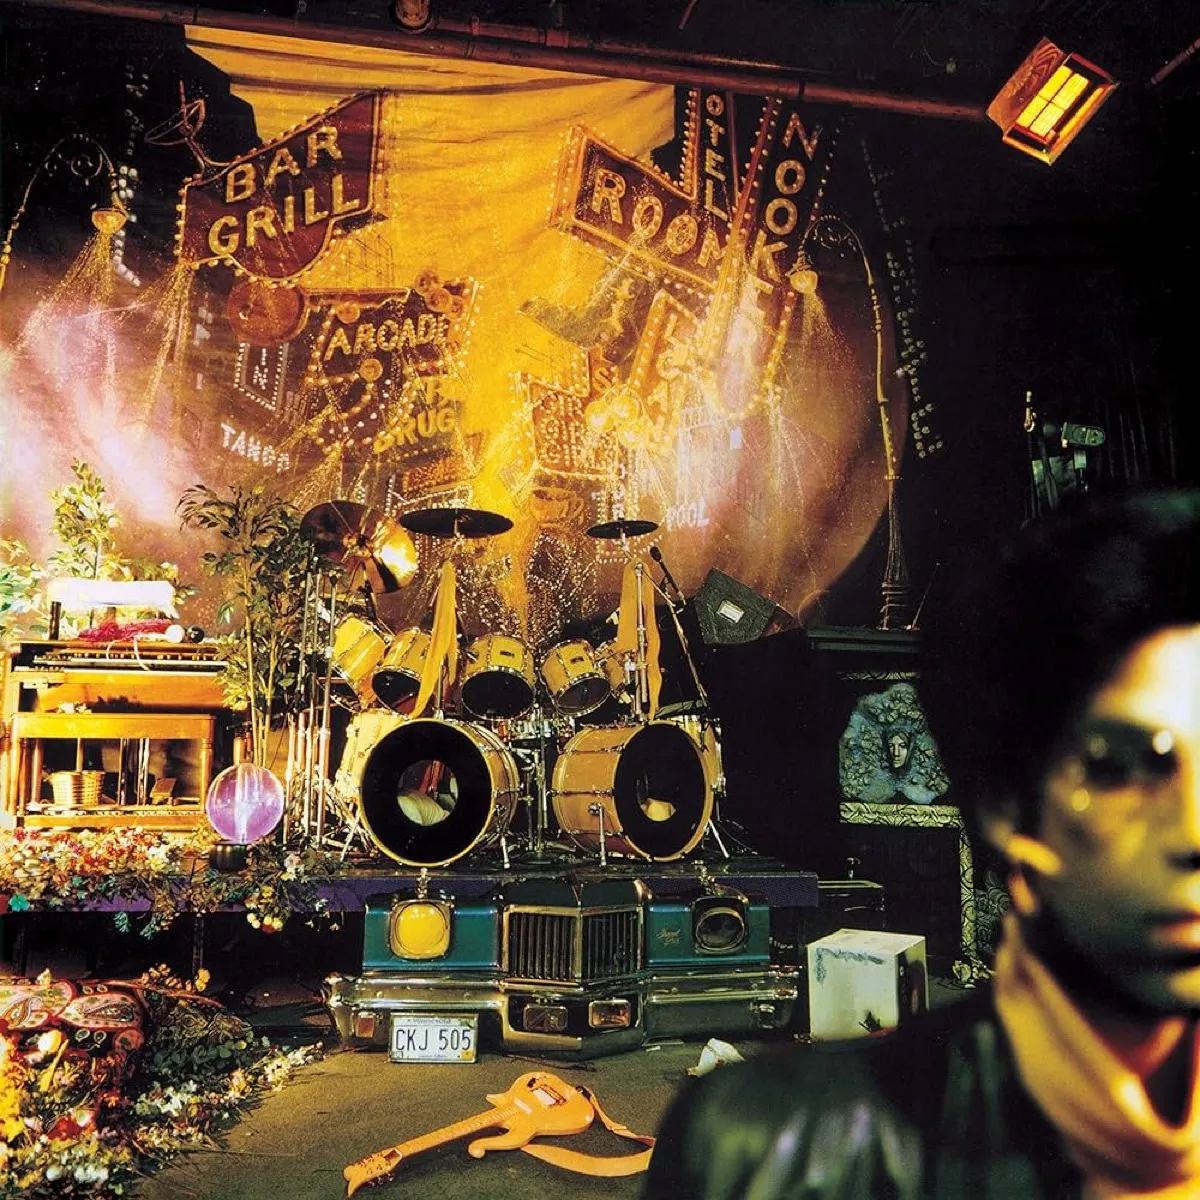 "Sign O' the Times" by Prince album cover